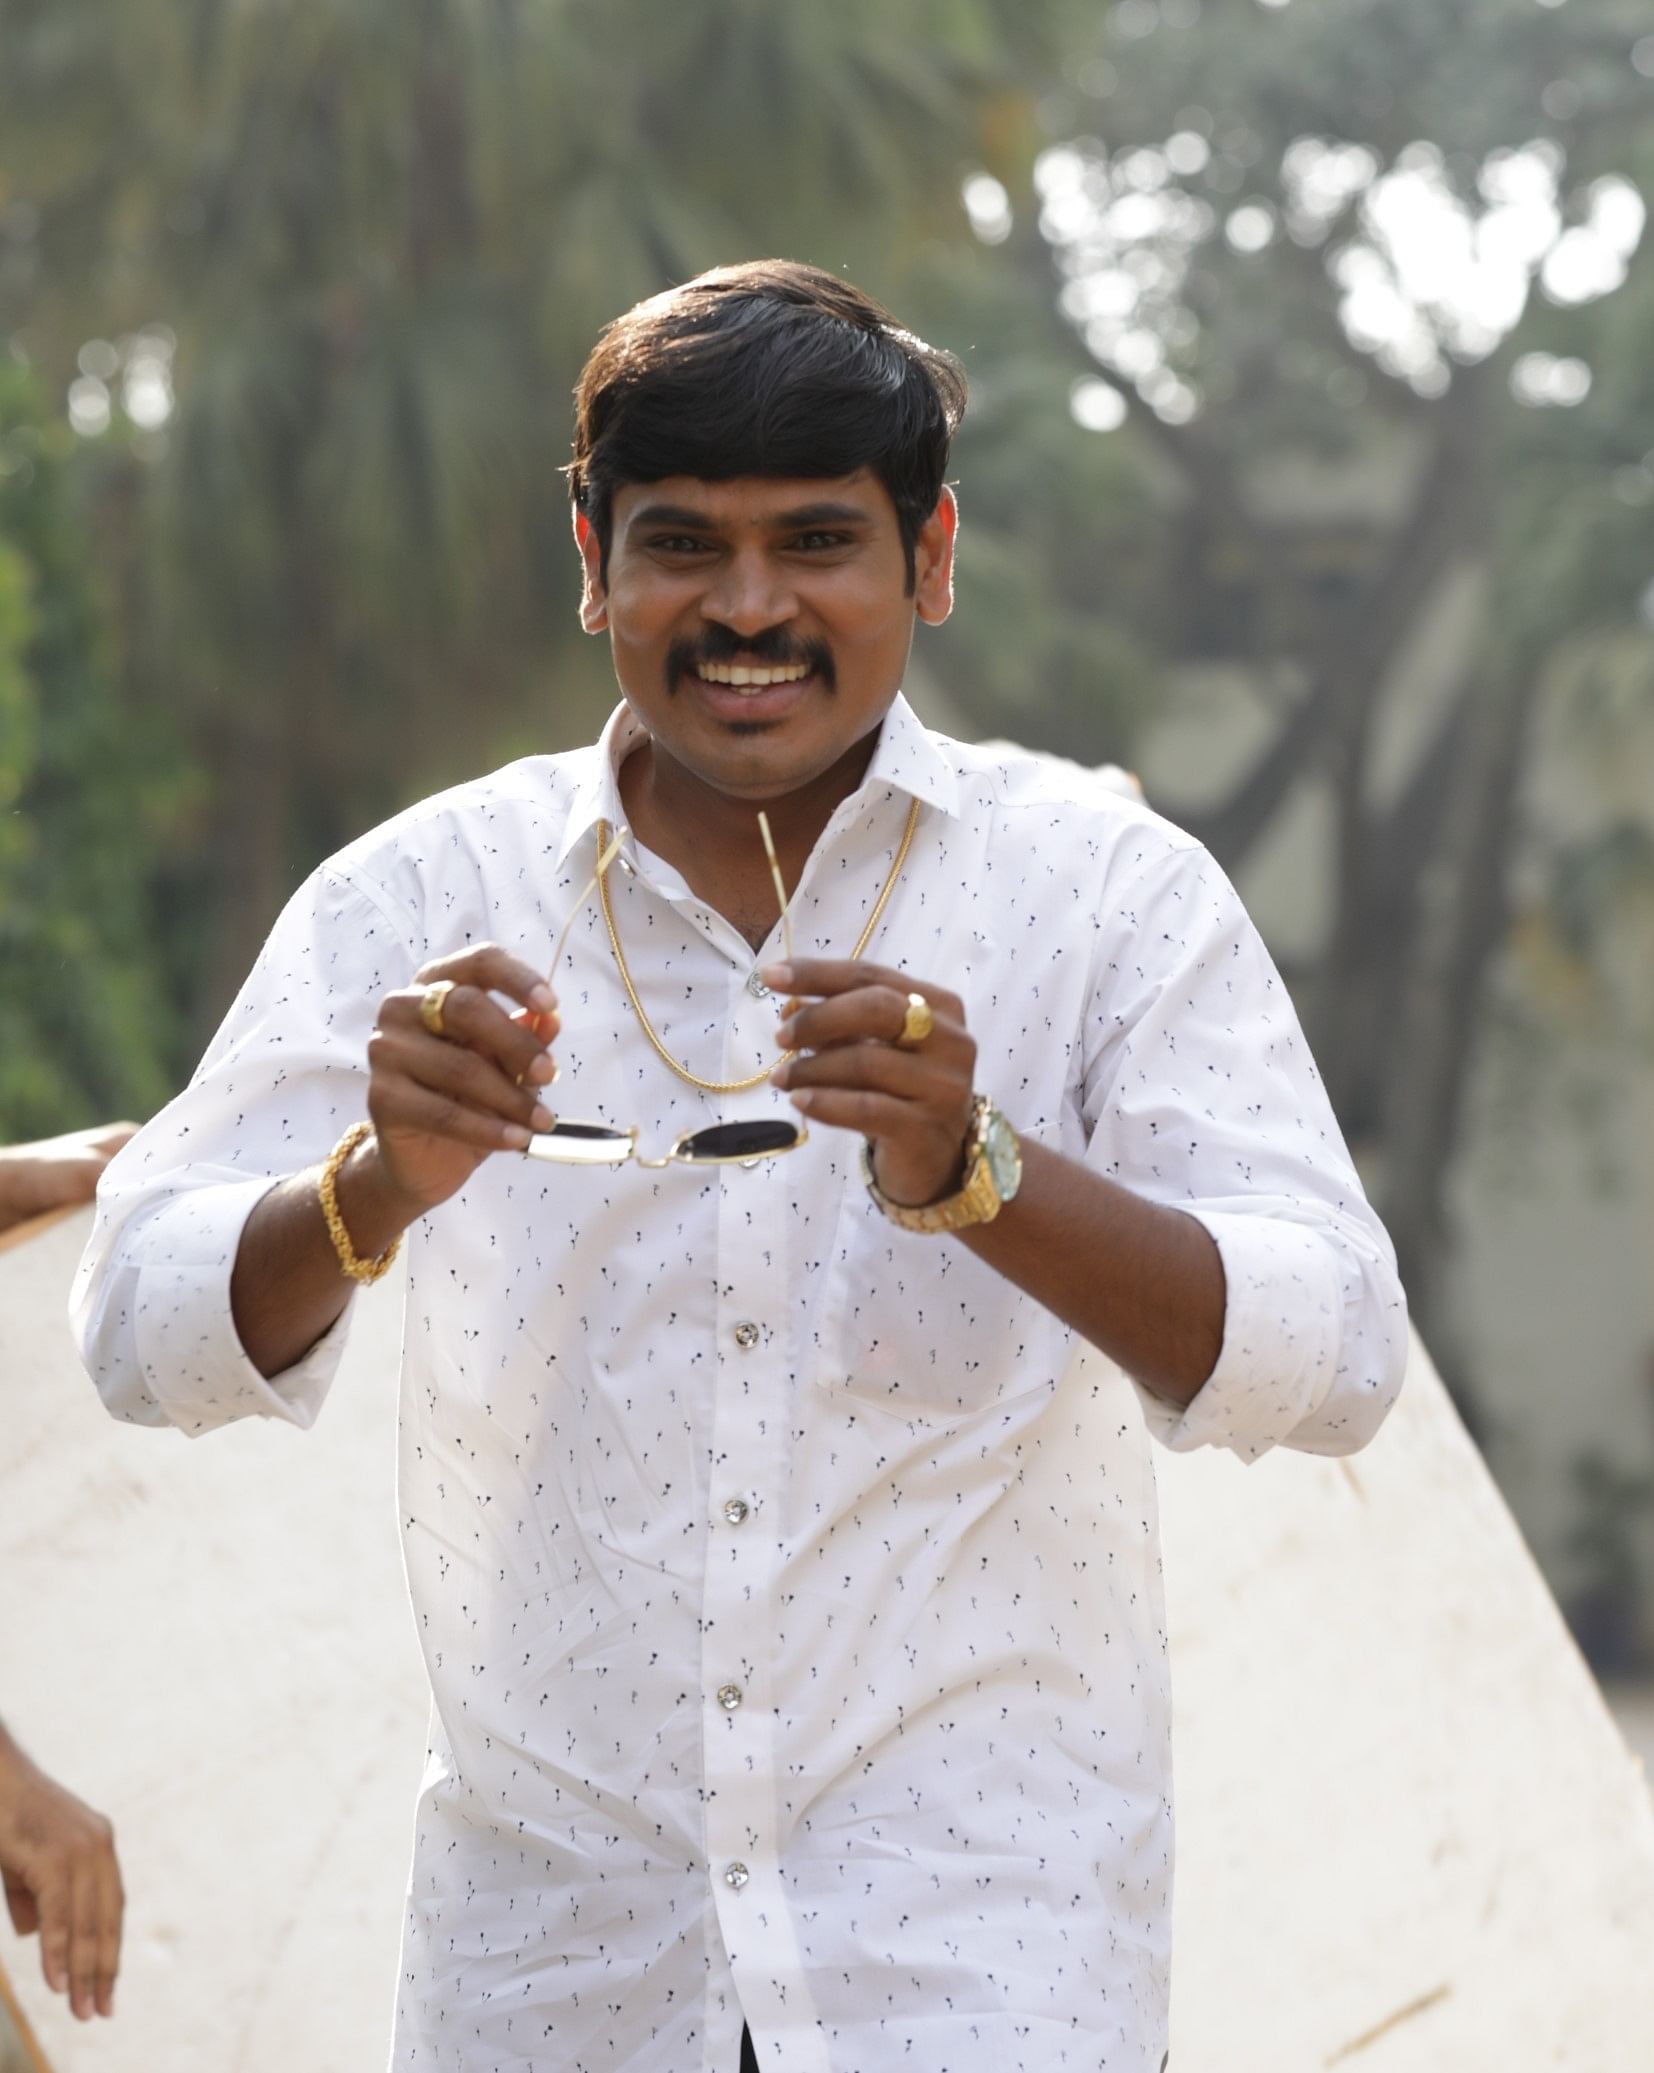 Dharmanna Kadur generates the laughs in 'Man of the Match', streaming on Amazon Prime Video.